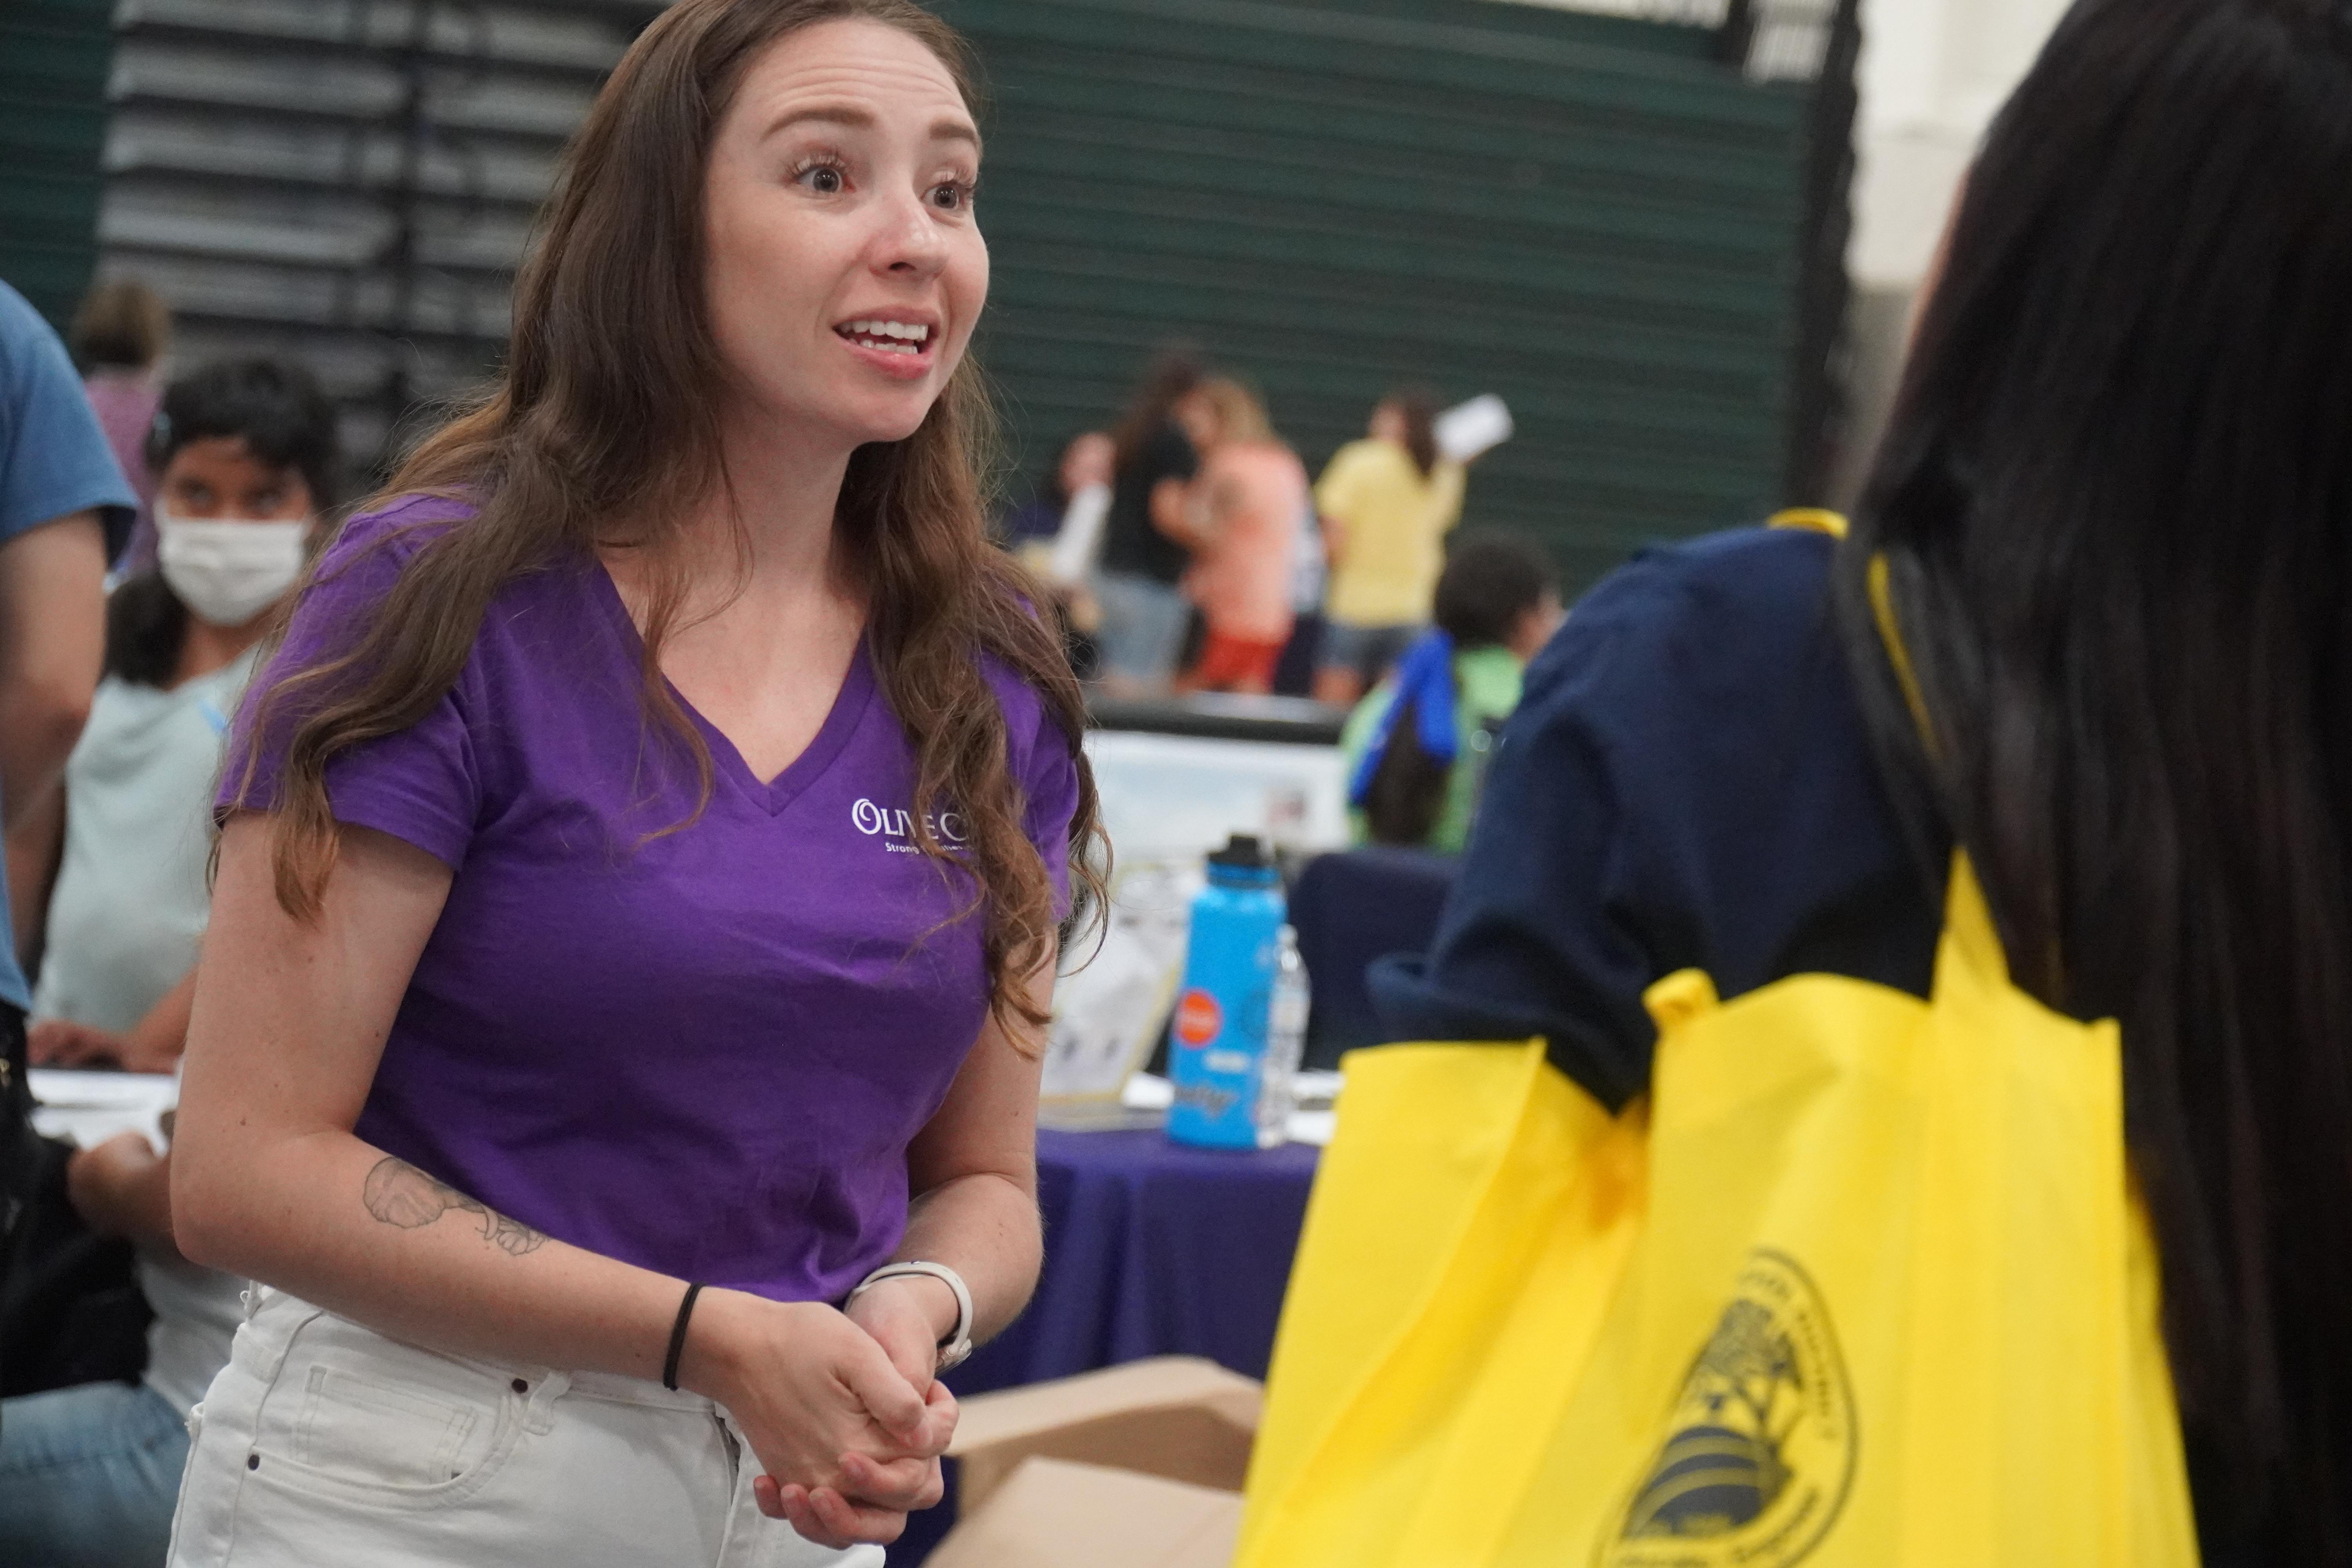 woman in a purple shirt talking to another woman with a table between them